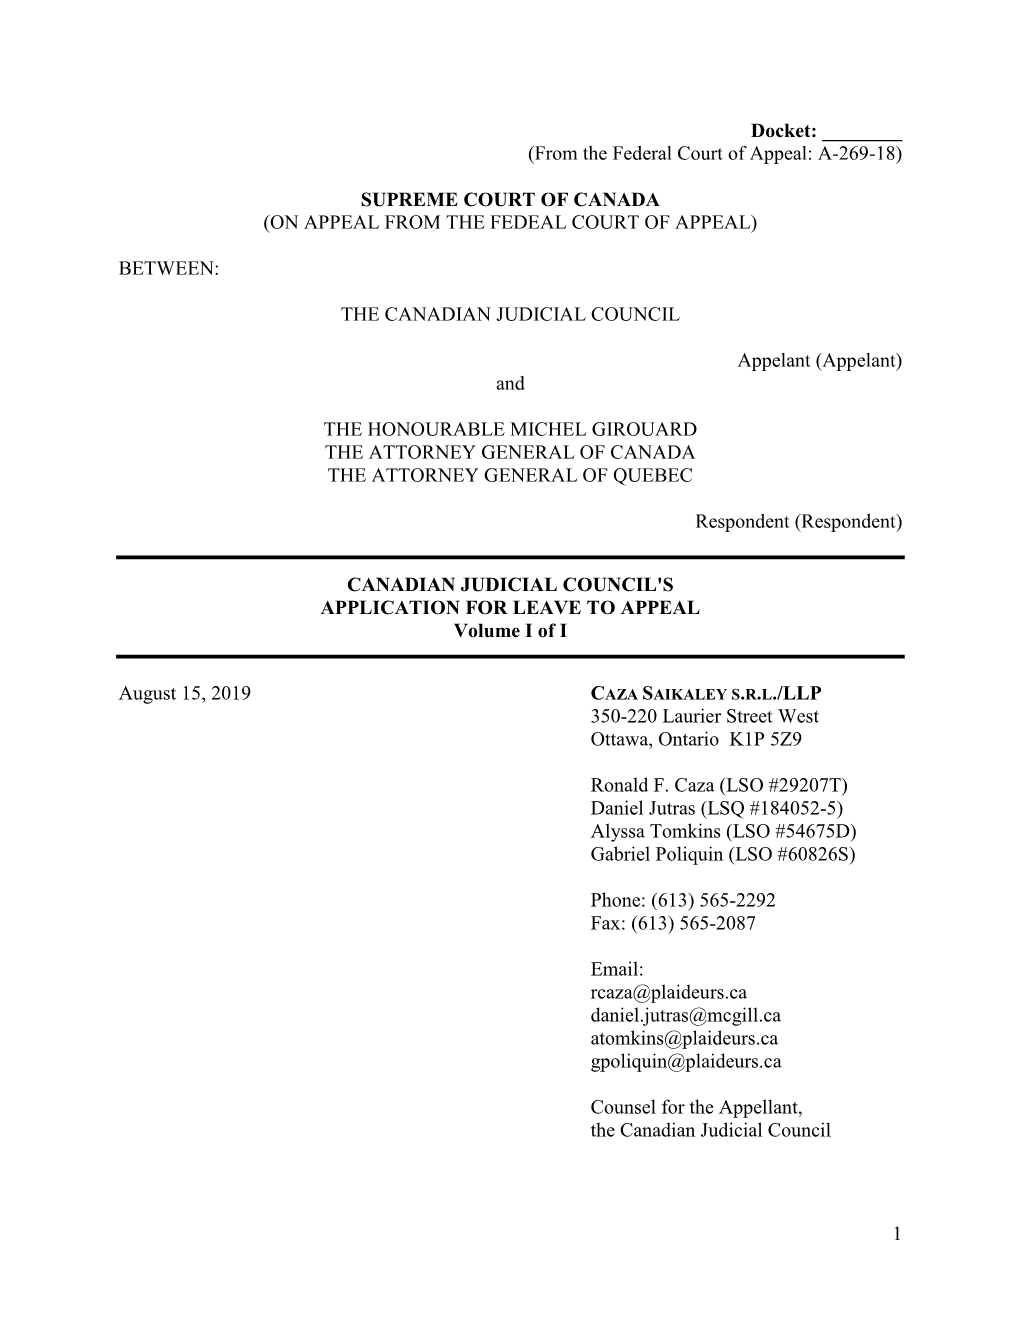 Application for Leave to Appeal to the Supreme Court of Canada